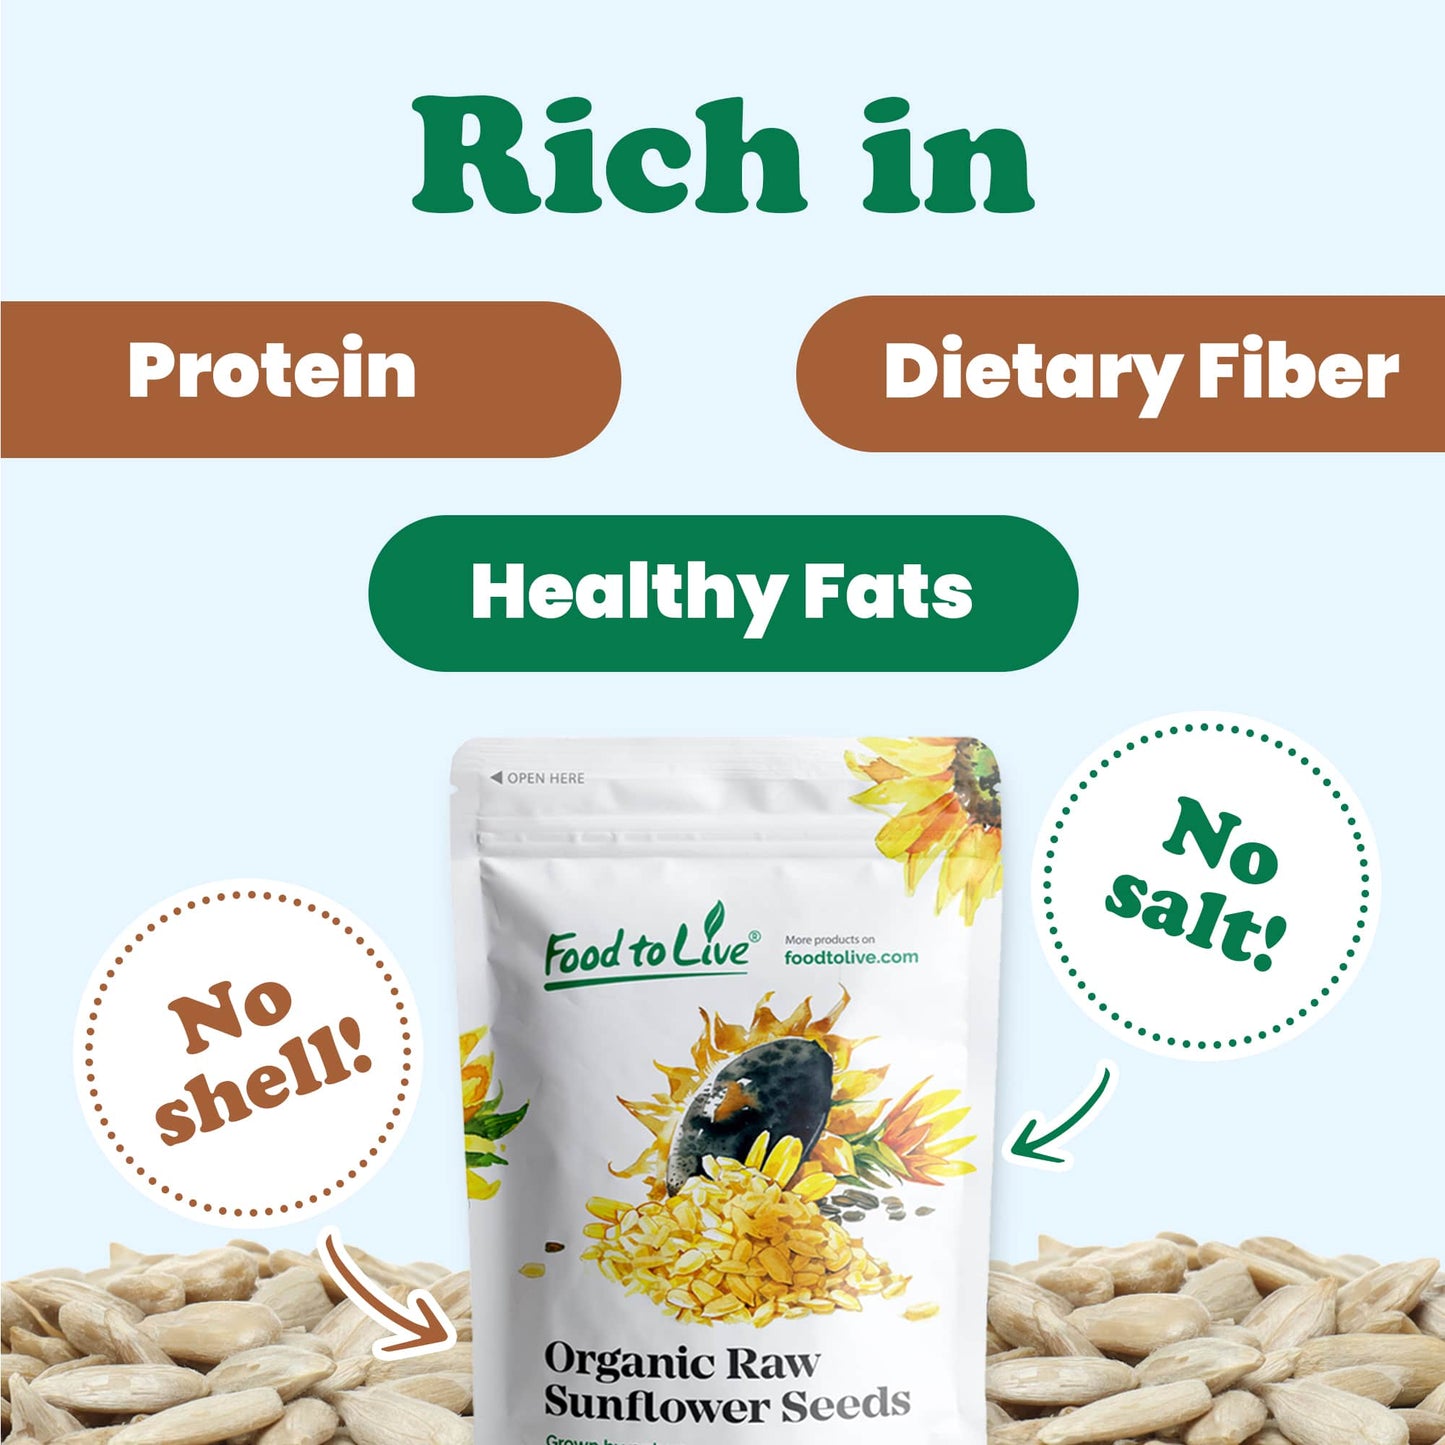 Organic Sunflower Seeds - Hulled, Raw, Non-GMO, Dried Kernels, Unsalted, Kosher, Vegan, Keto, Paleo, Sirtfood, Bulk, Low Sodium Nuts, Good Source of Protein, Vitamins E, B6 - by Food to Live